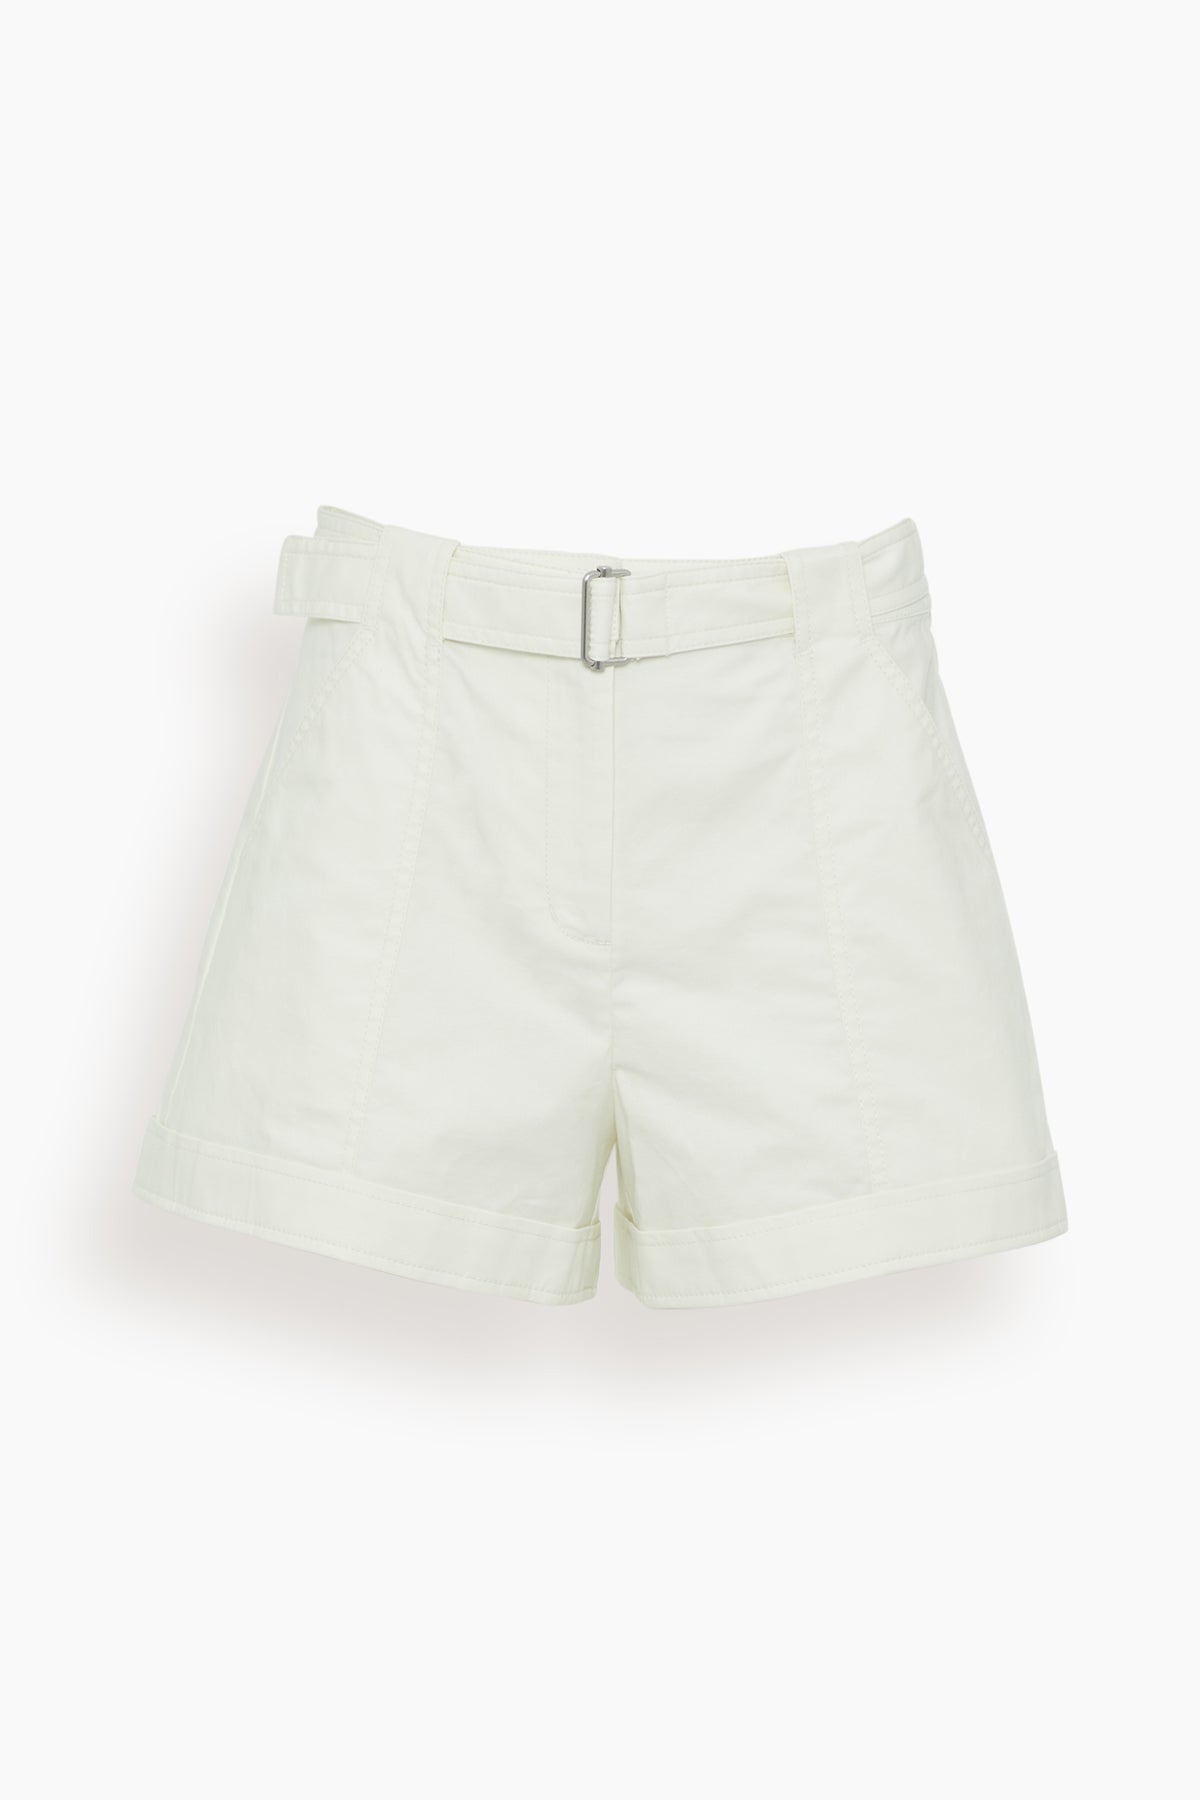 Simkhai Shorts Lourie Belted Shorts in White